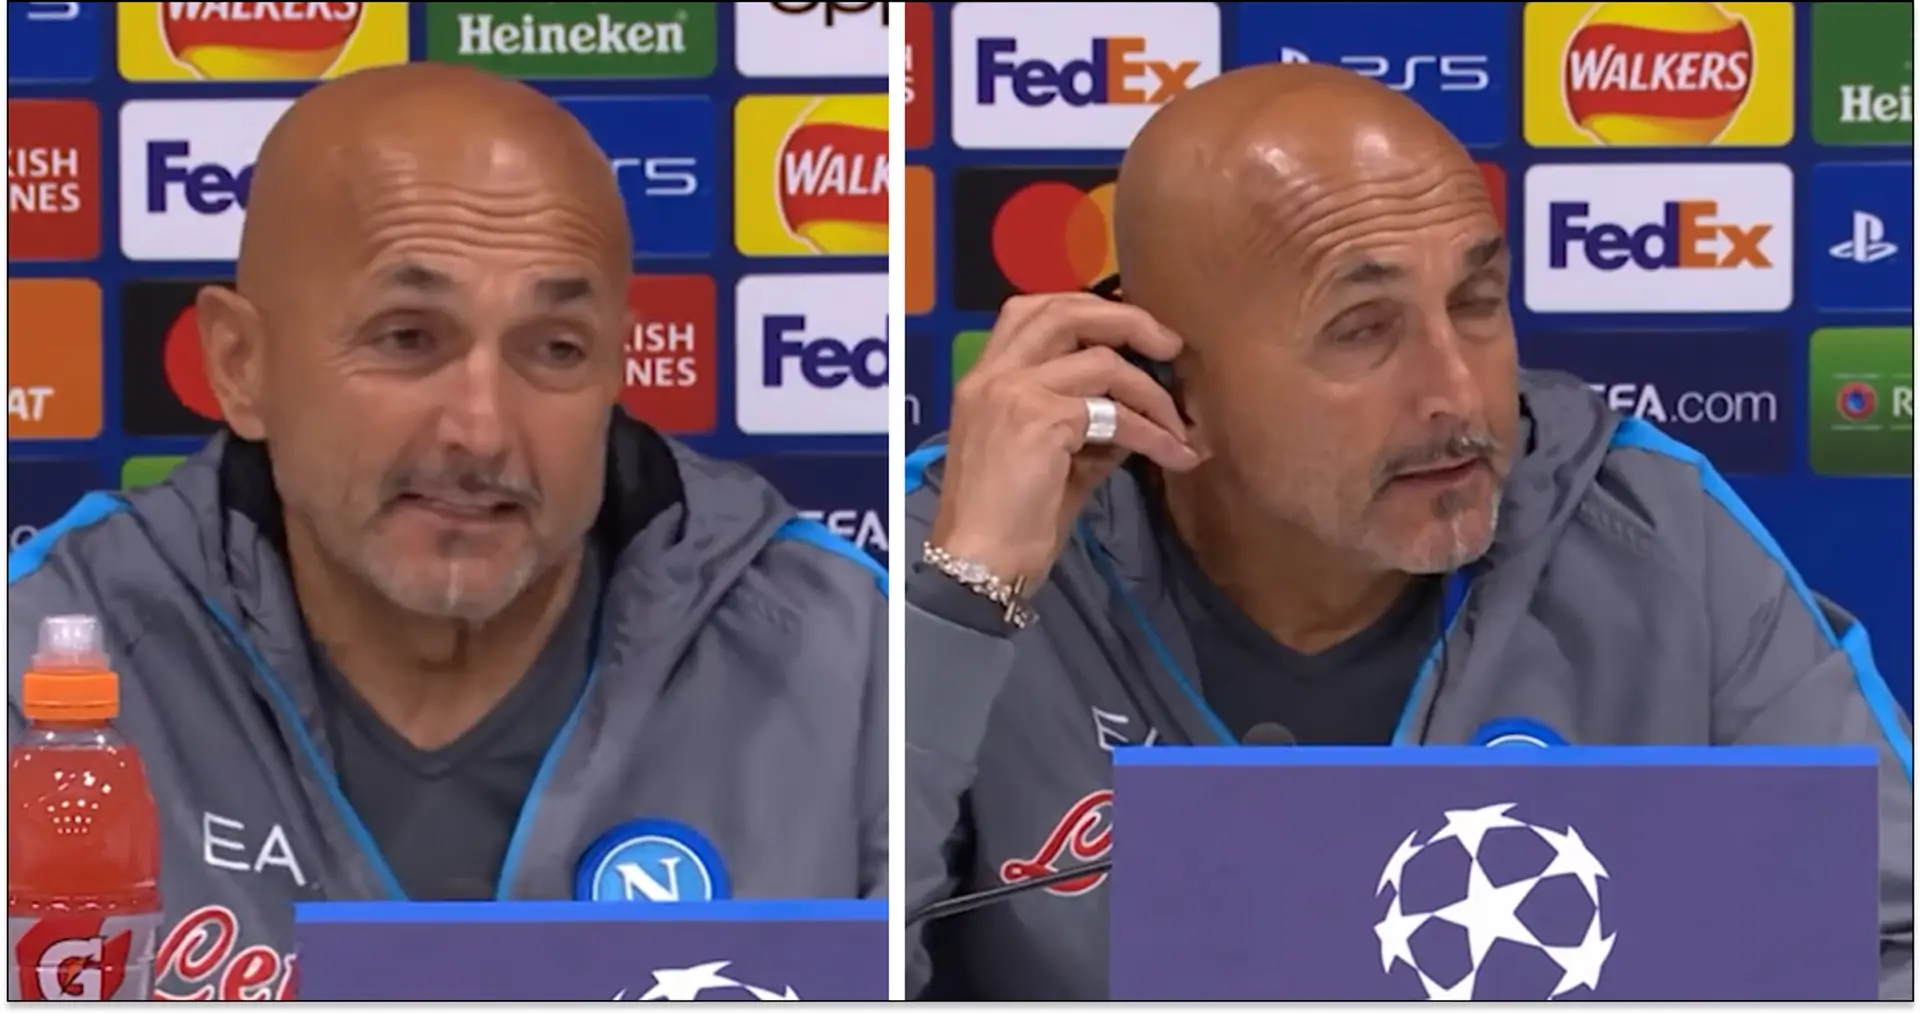 'We are not daft': Spalletti insists Napoli won't be 'tricked' by Liverpool's Leeds defeat